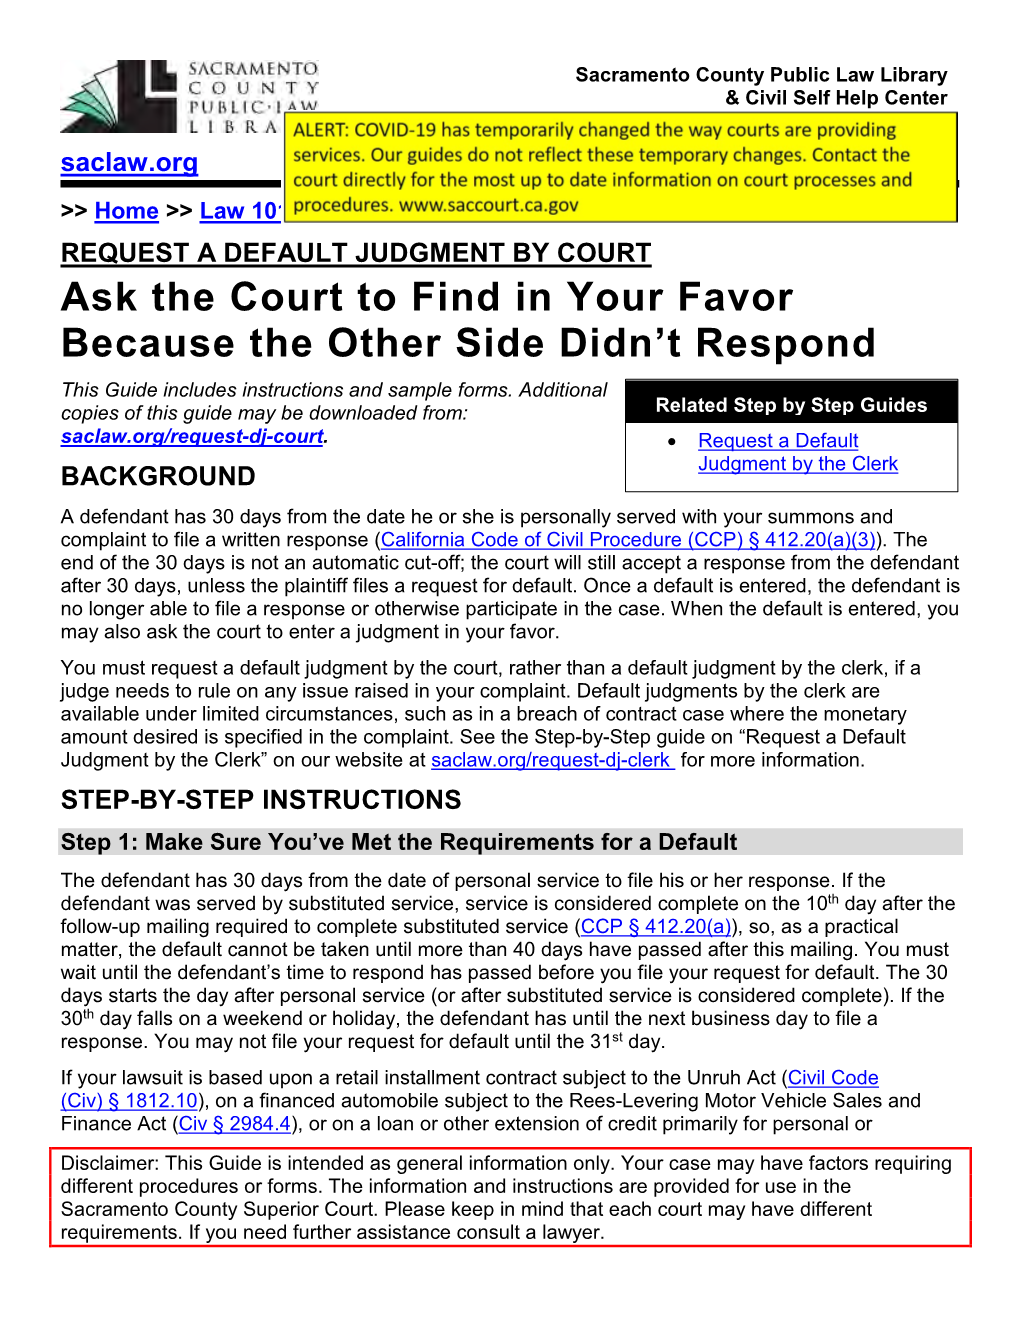 REQUEST a DEFAULT JUDGMENT by COURT Ask the Court to Find in Your Favor Because the Other Side Didn’T Respond This Guide Includes Instructions and Sample Forms